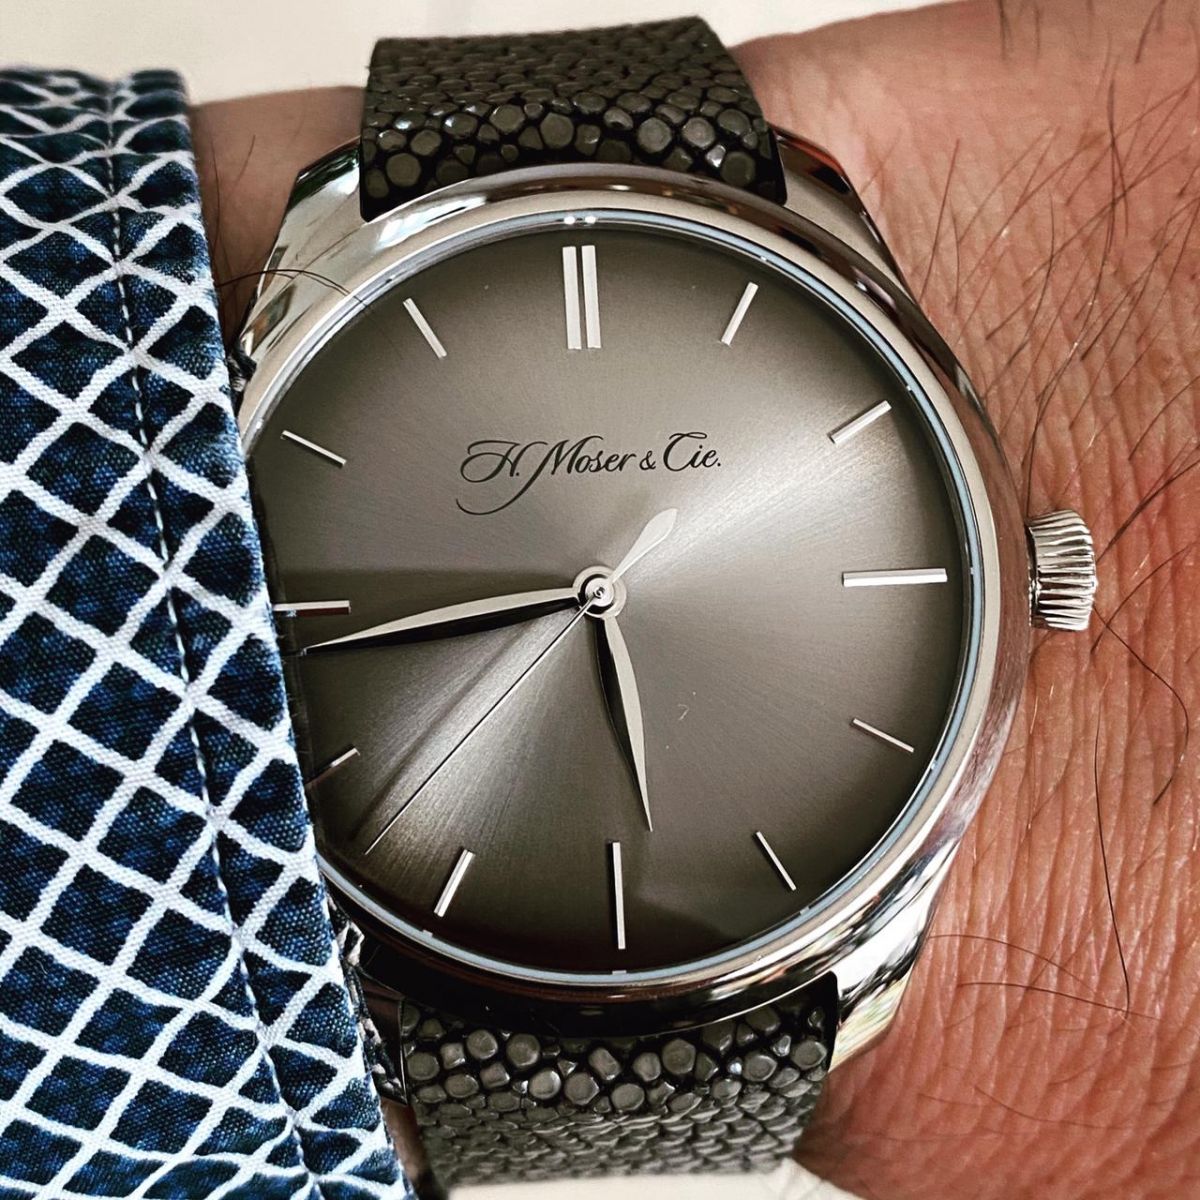 Milano Grey Genuine Stingray leather strap 20mm H.Moser & Cie style